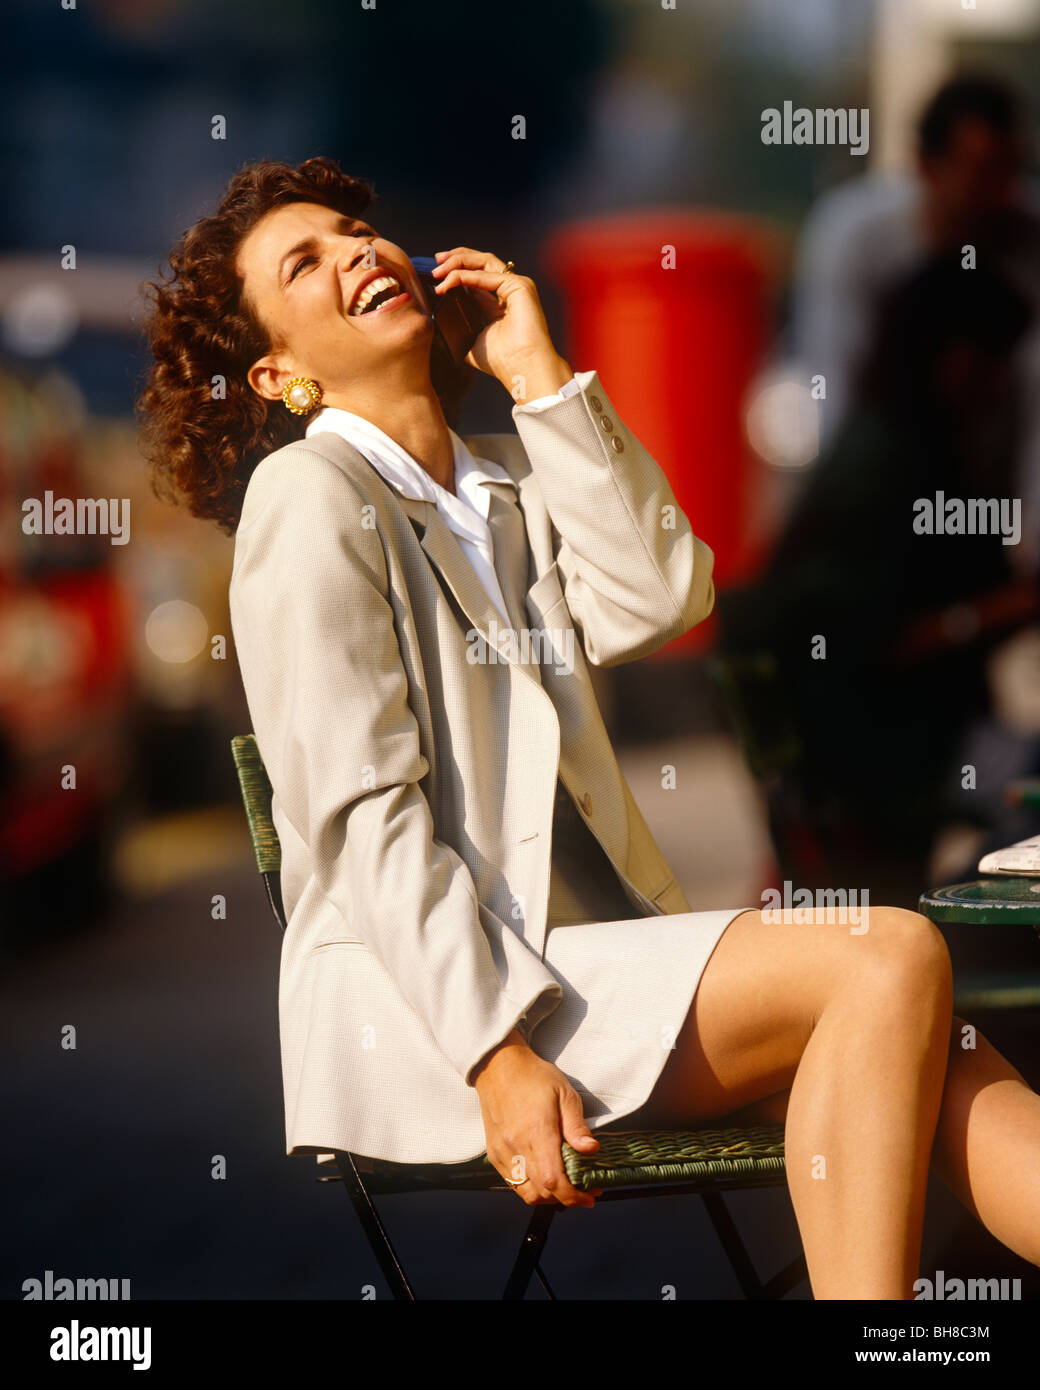 Dark haired girl sitting and laughing Stock Photo